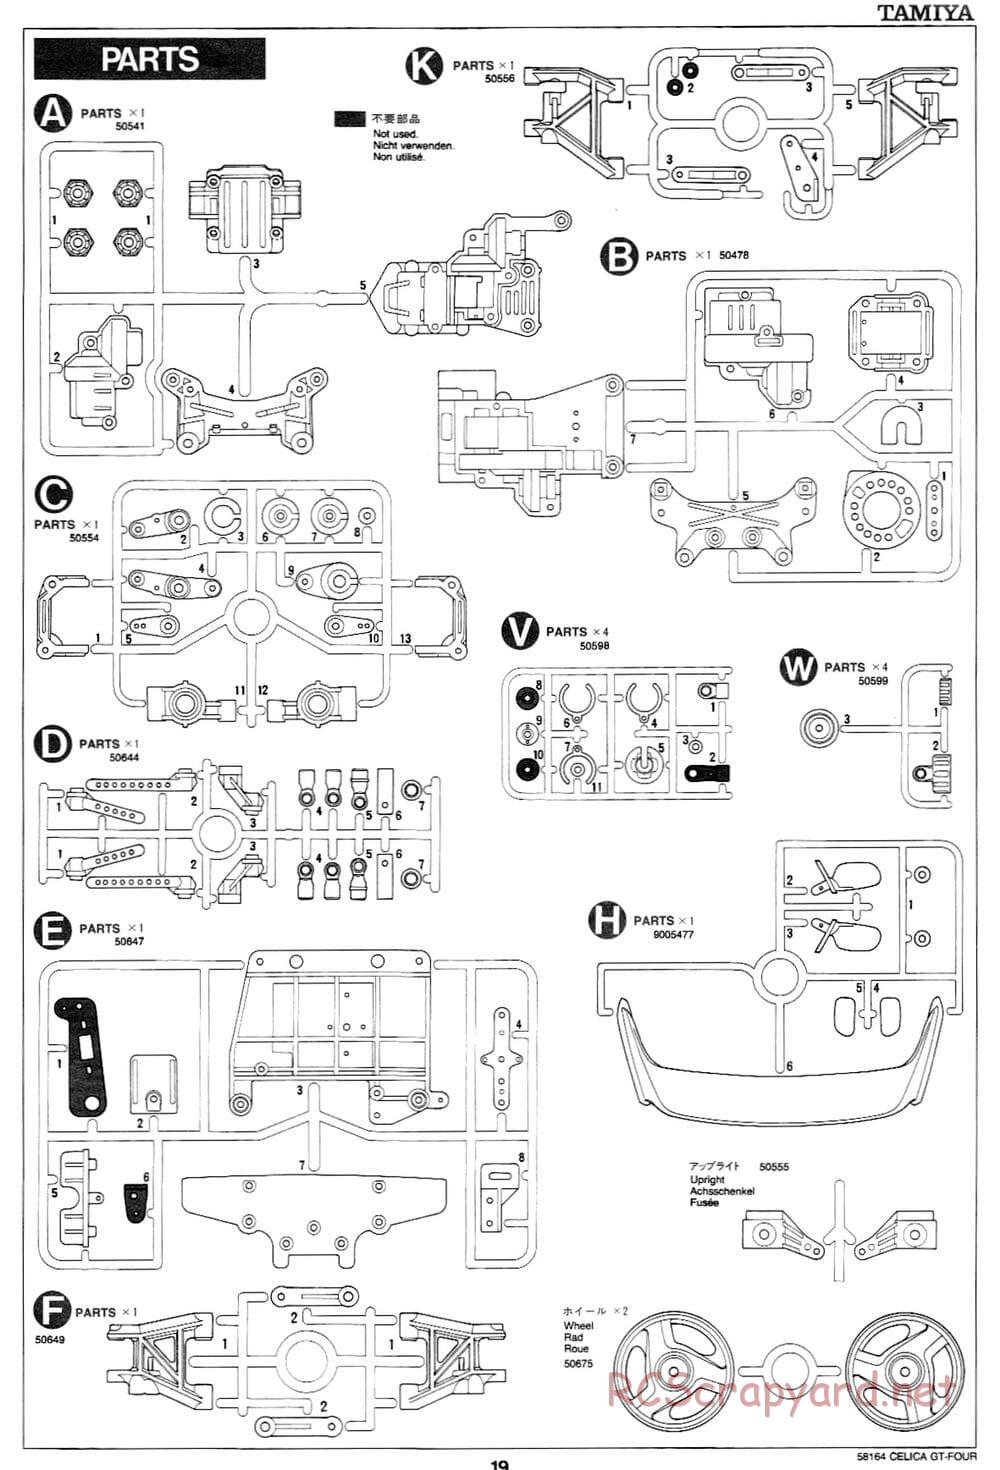 Tamiya - Toyota Celica GT Four - TA-02 Chassis - Manual - Page 20